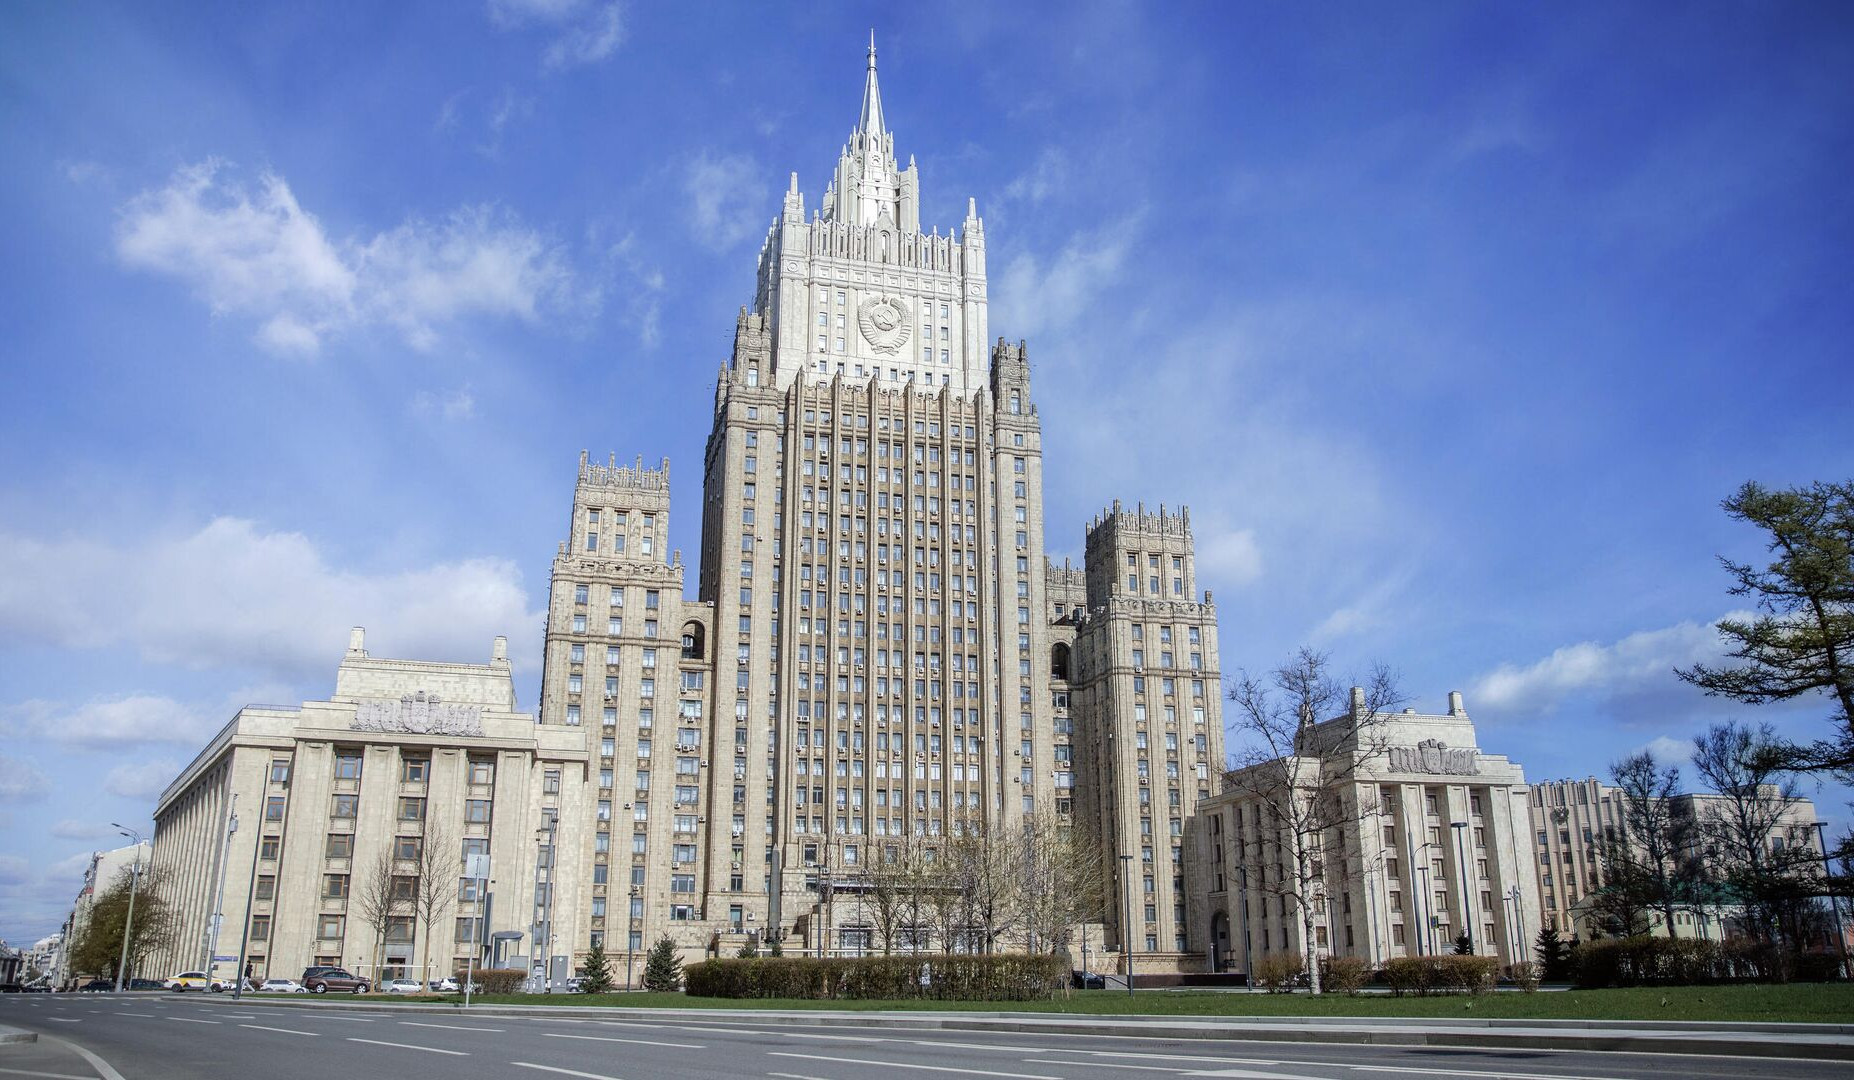 Dialogue between Russia and United States on strategic stability frozen: Russian MFA